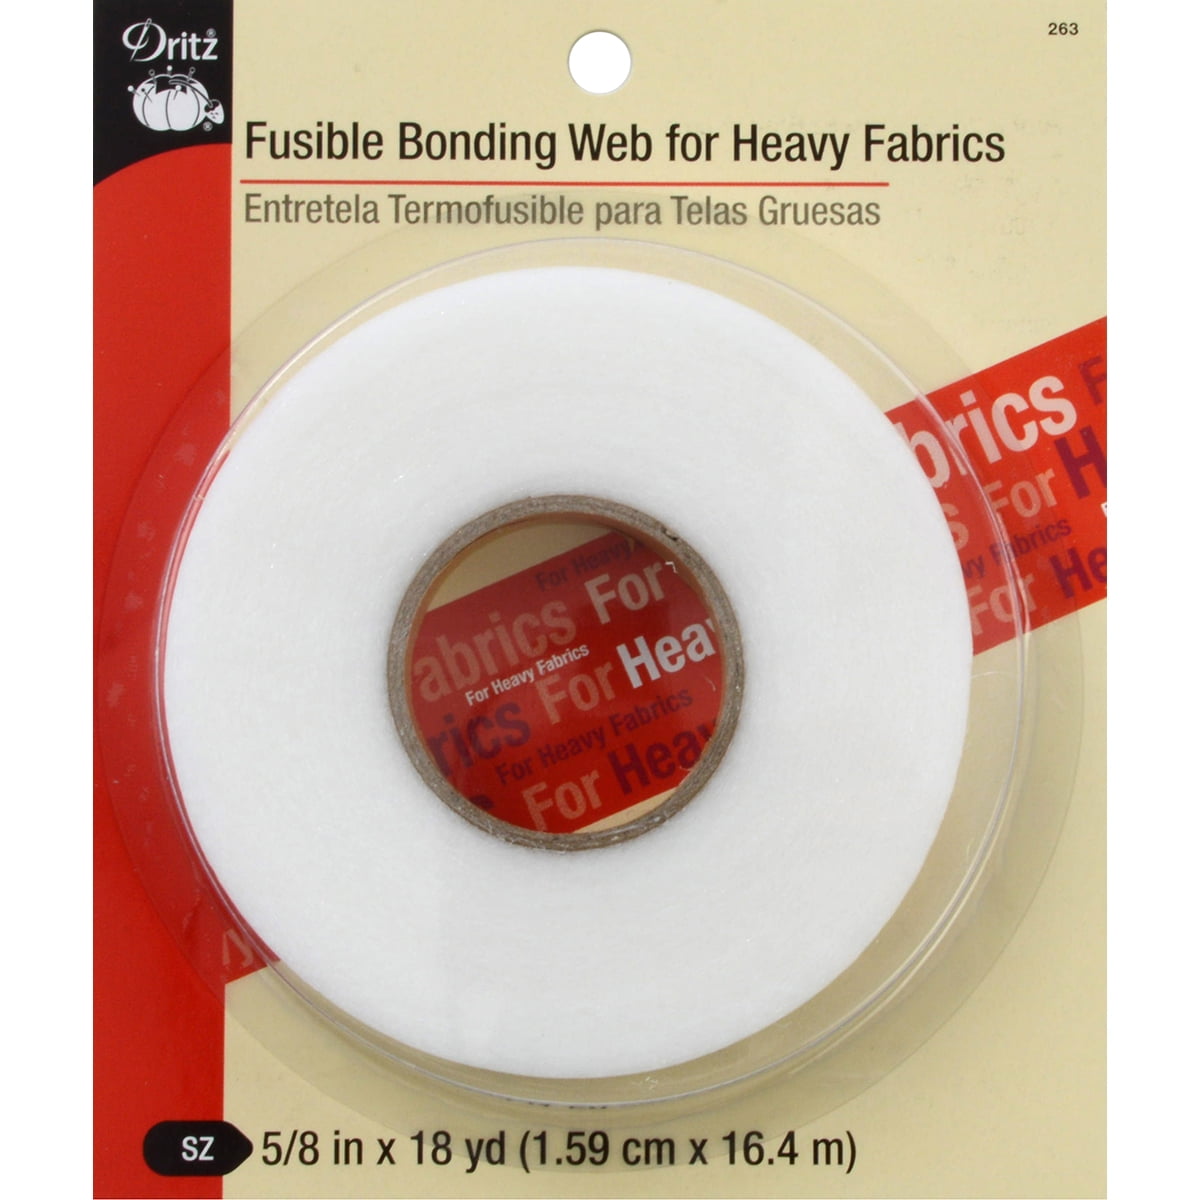 Double-sided Fusible Bonding Web Tape 1” wide (regular weight